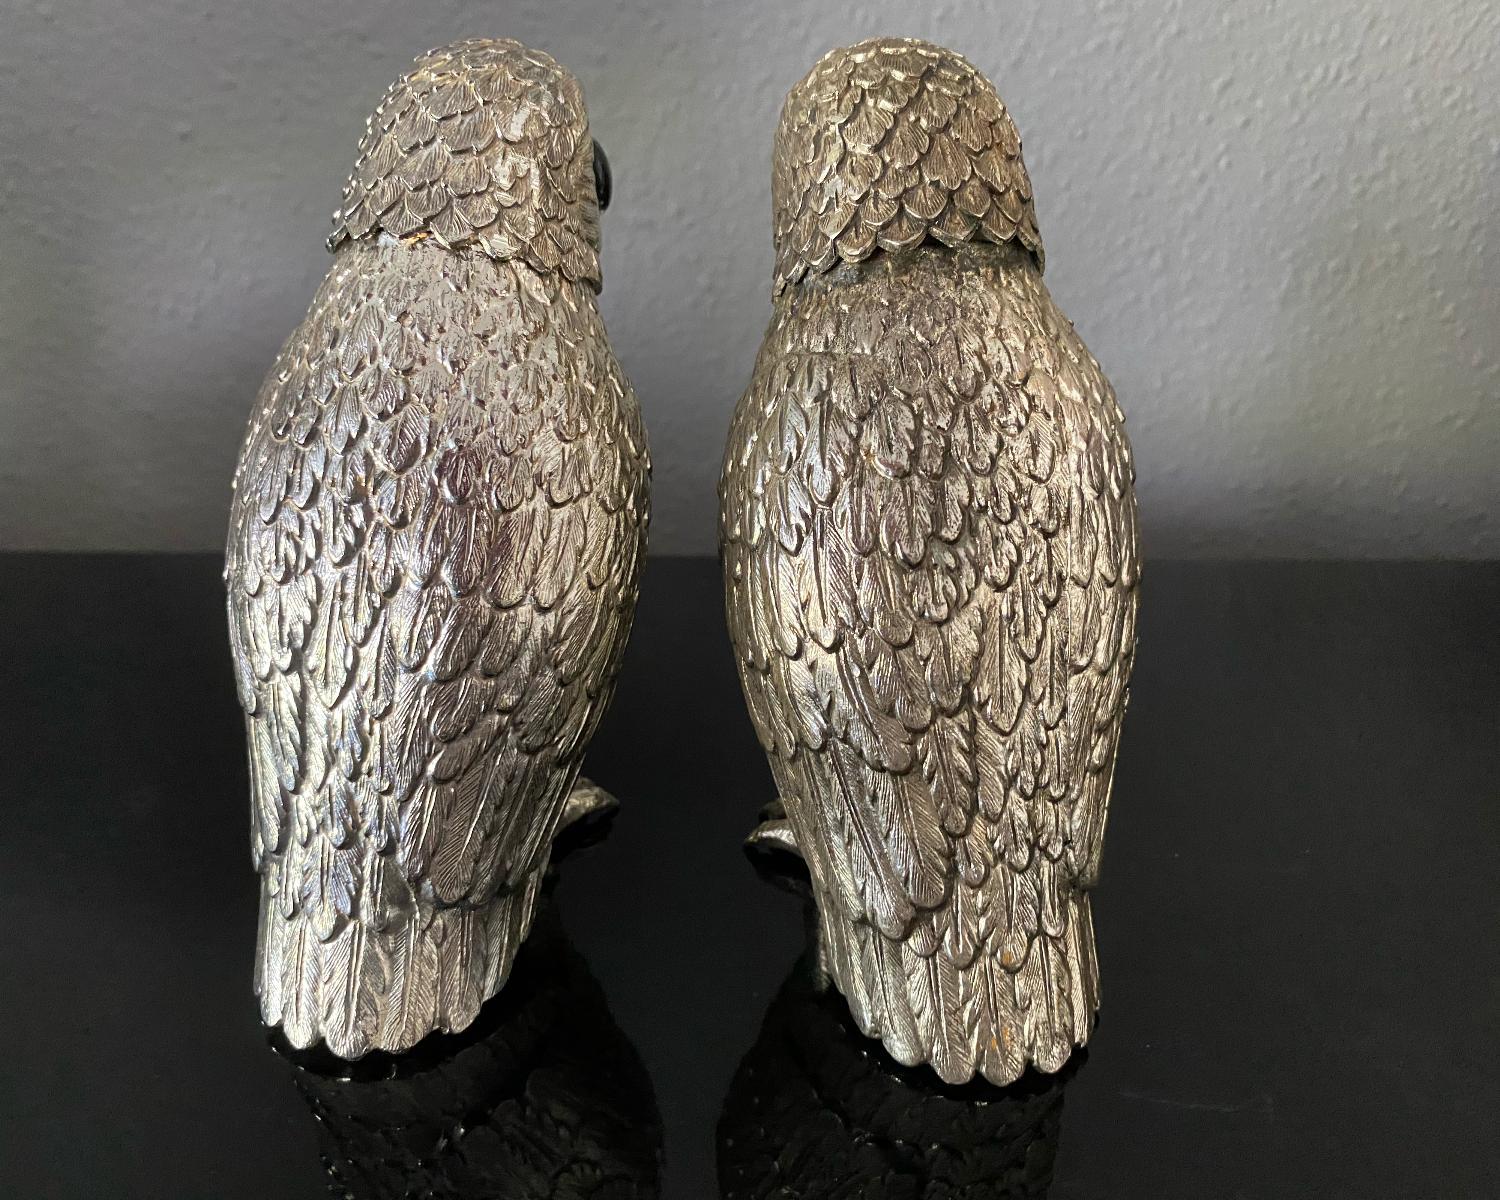 Silver Plate Owl Corbell Salt & Pepper Shakers W/ Large Inset Glass Eyes For Sale 9